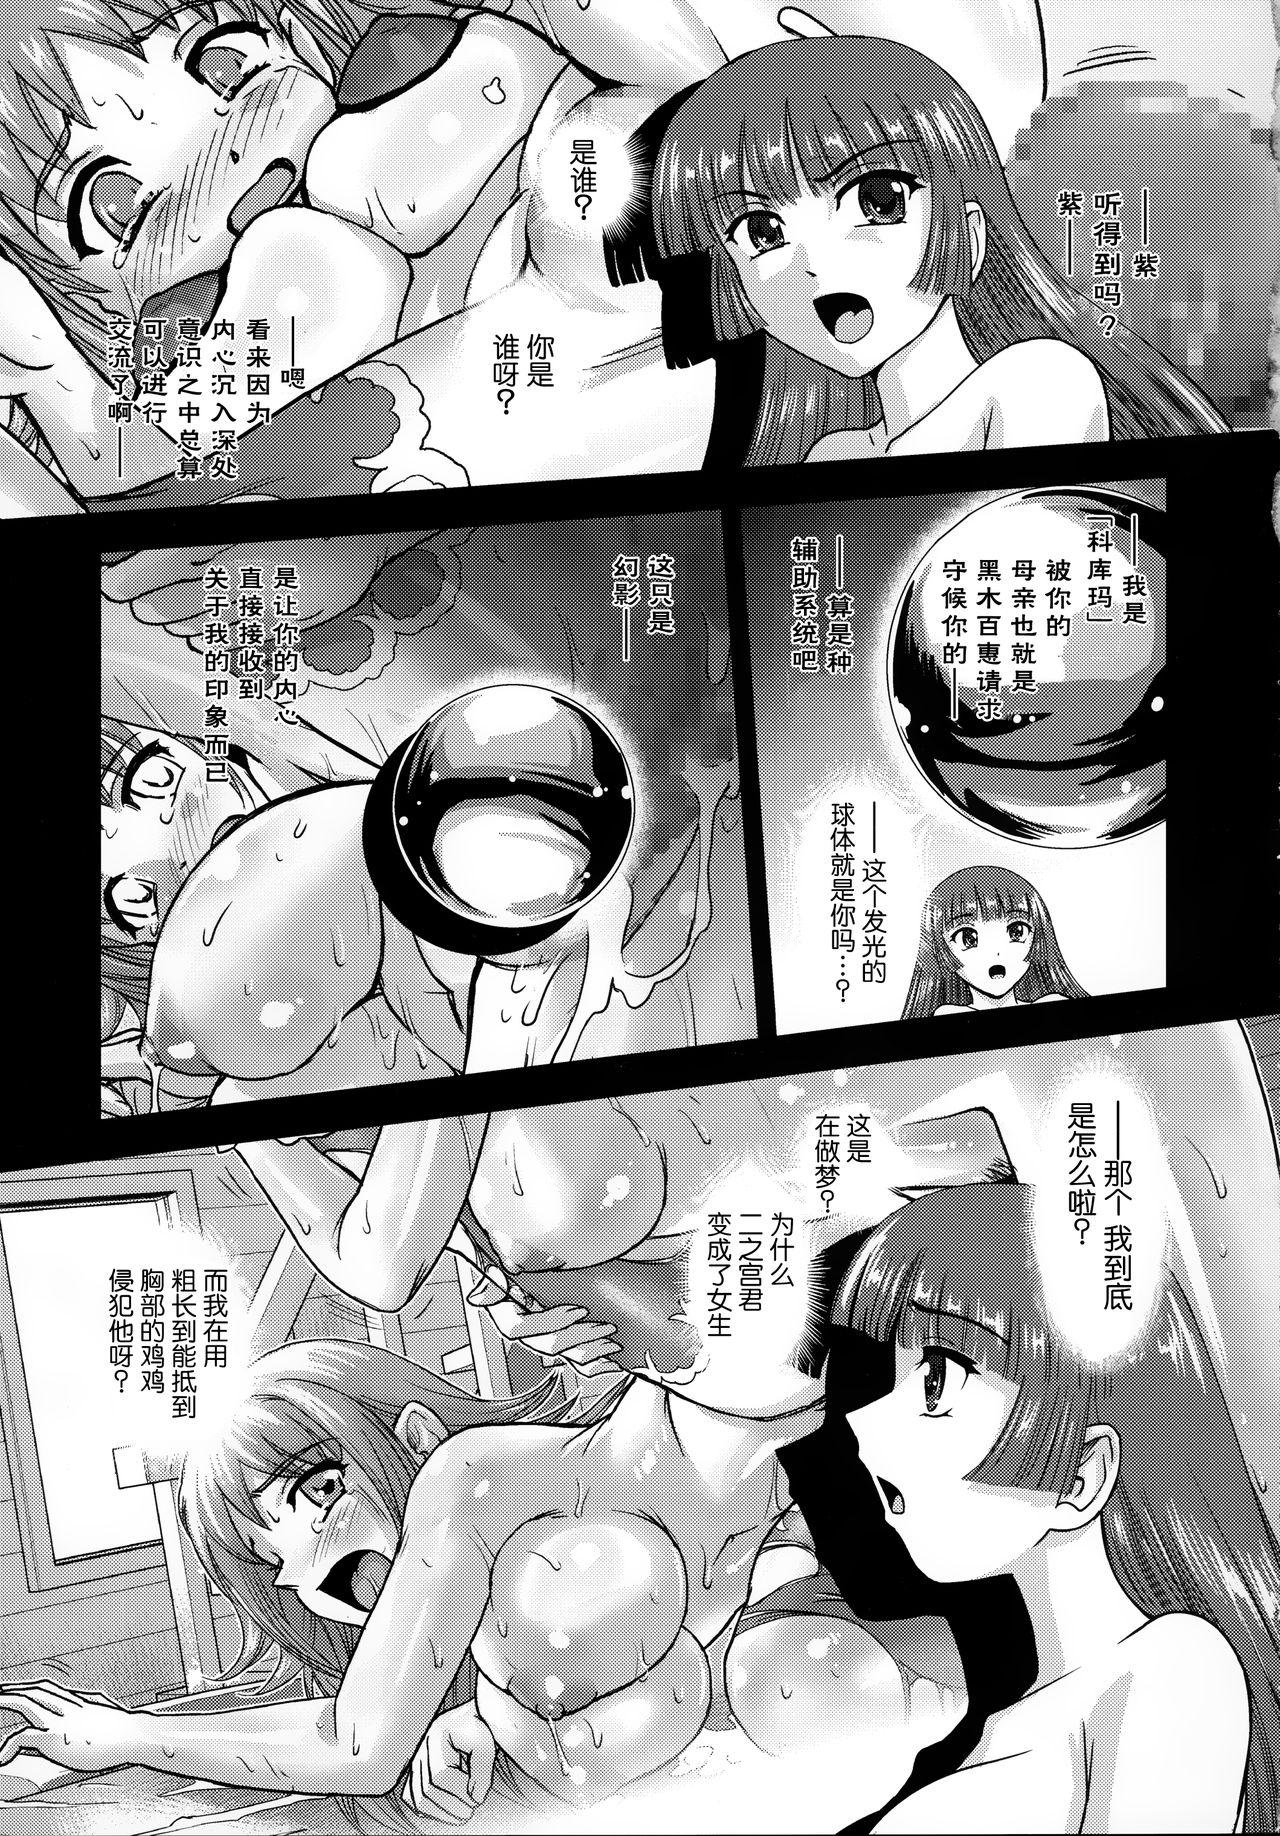 Chastity (C95) [Behind Moon (Dulce-Q)] DR:II ep.7 ~Dulce Report~ | 达西报告II Ep.7 [Chinese] [鬼畜王汉化组] - Original Amateur Porno - Page 5